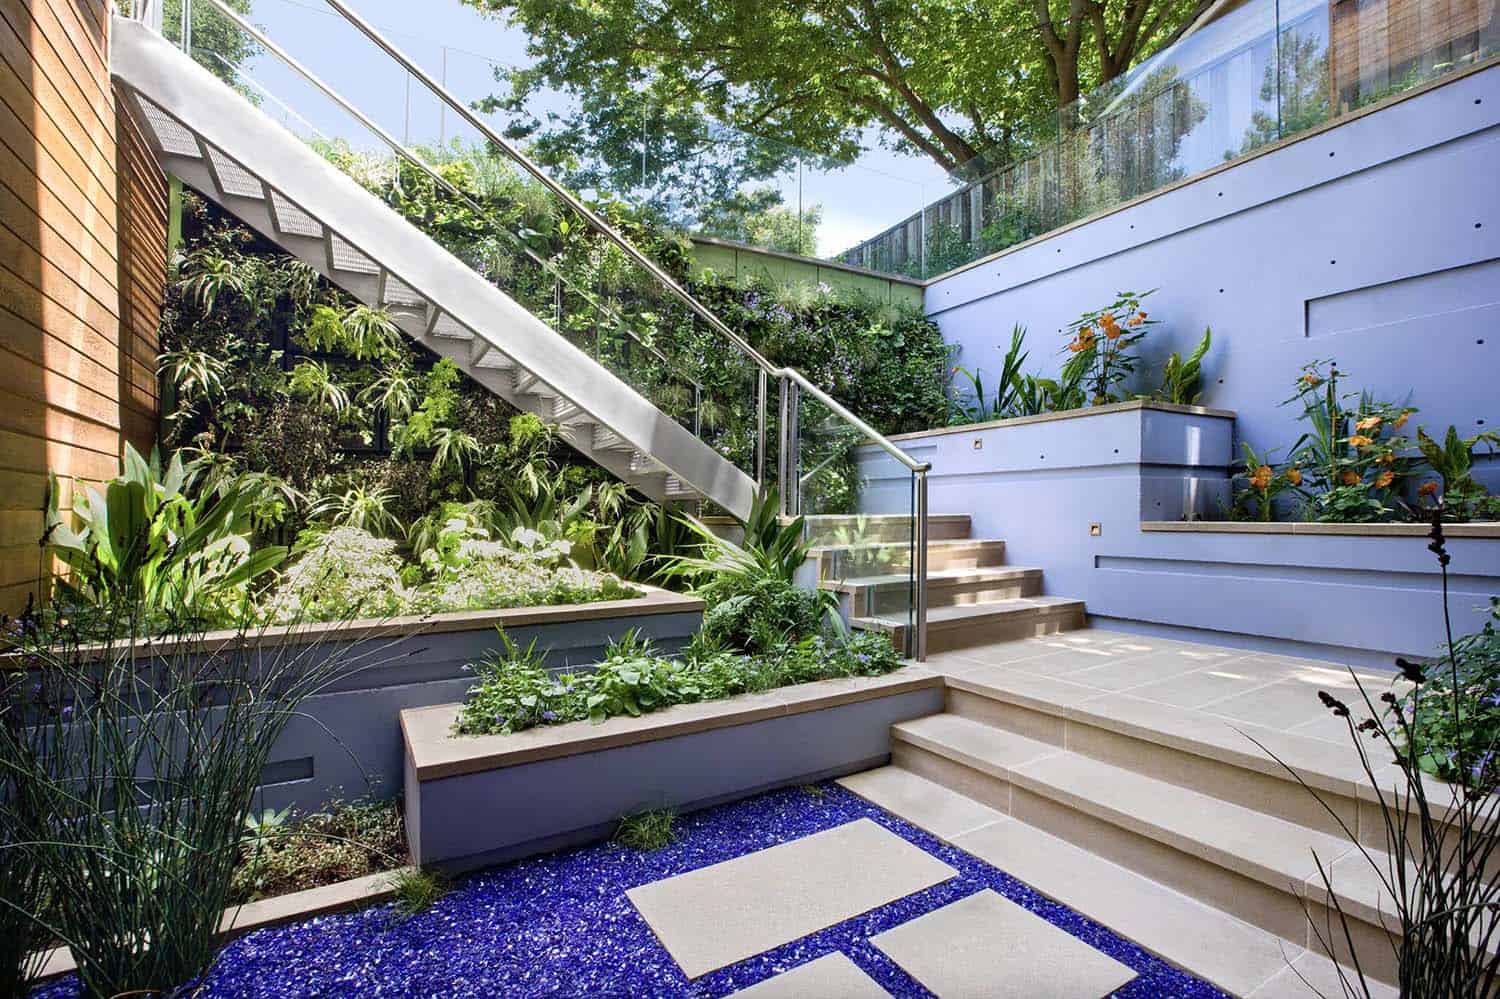 exterior stair to below-grade patio and garden with planted green walls and built-in planters